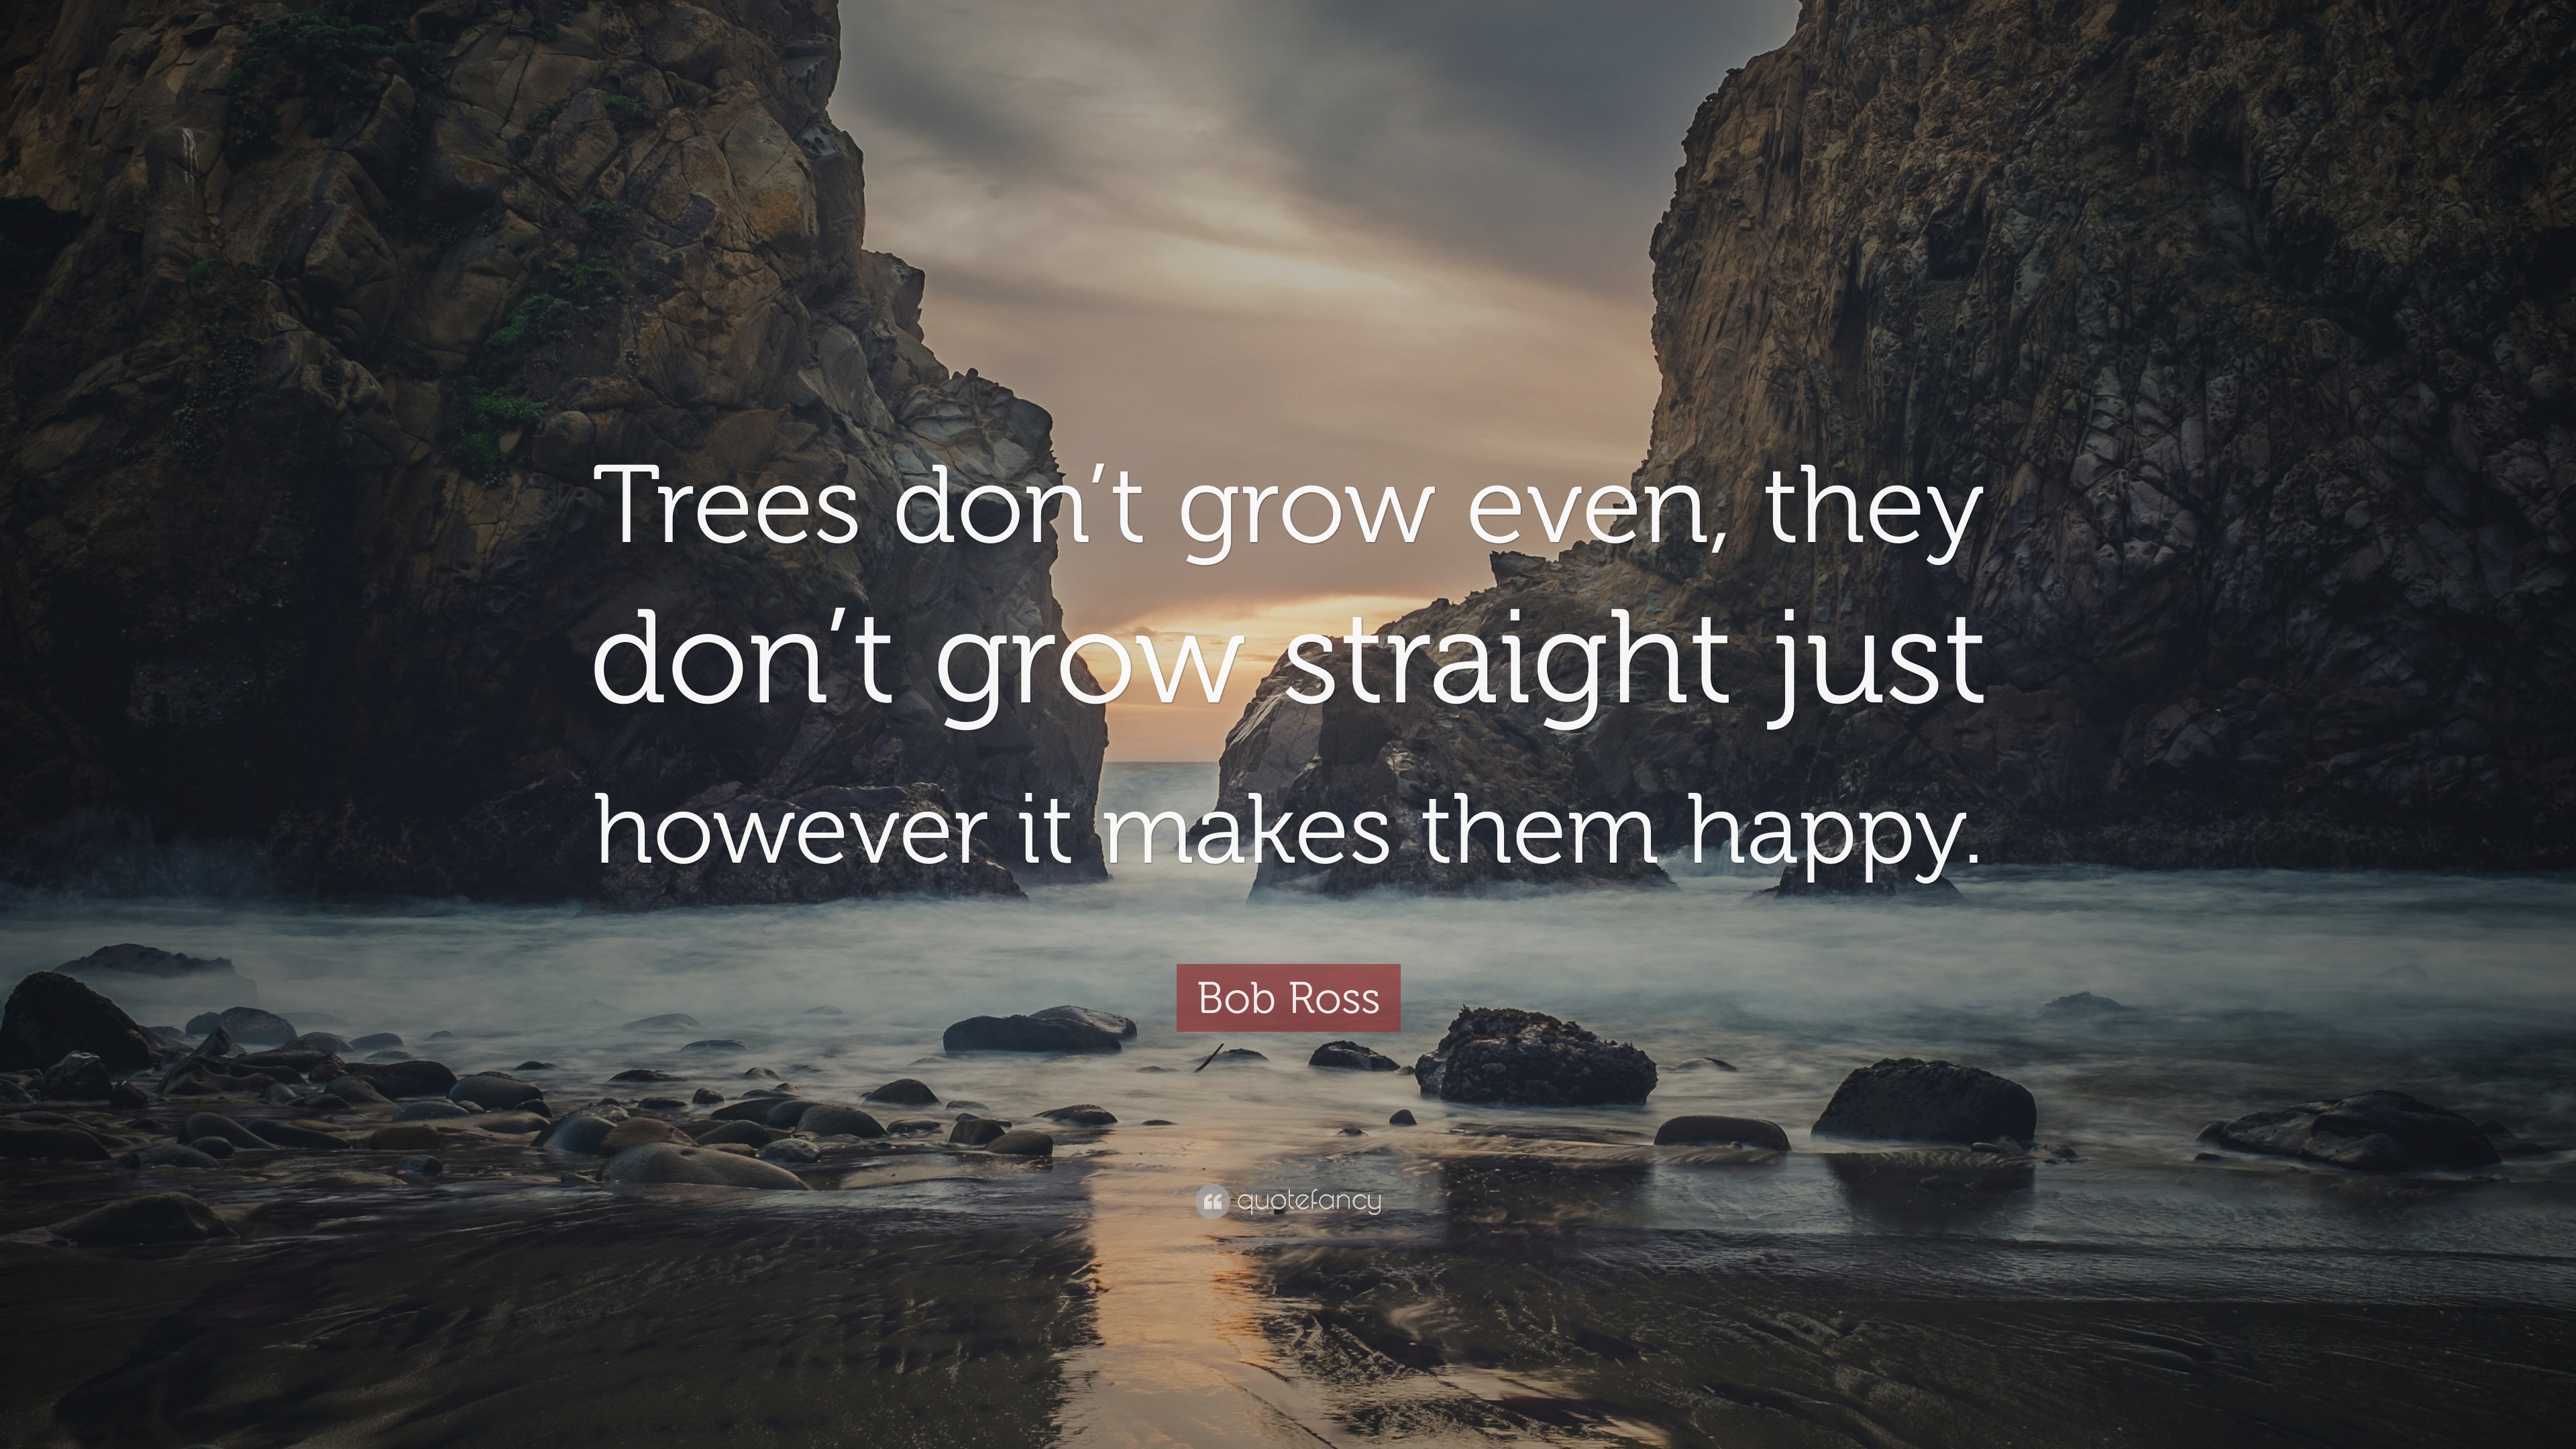 Trees don’t grow even, they don’t grow straight just however it makes them happy...